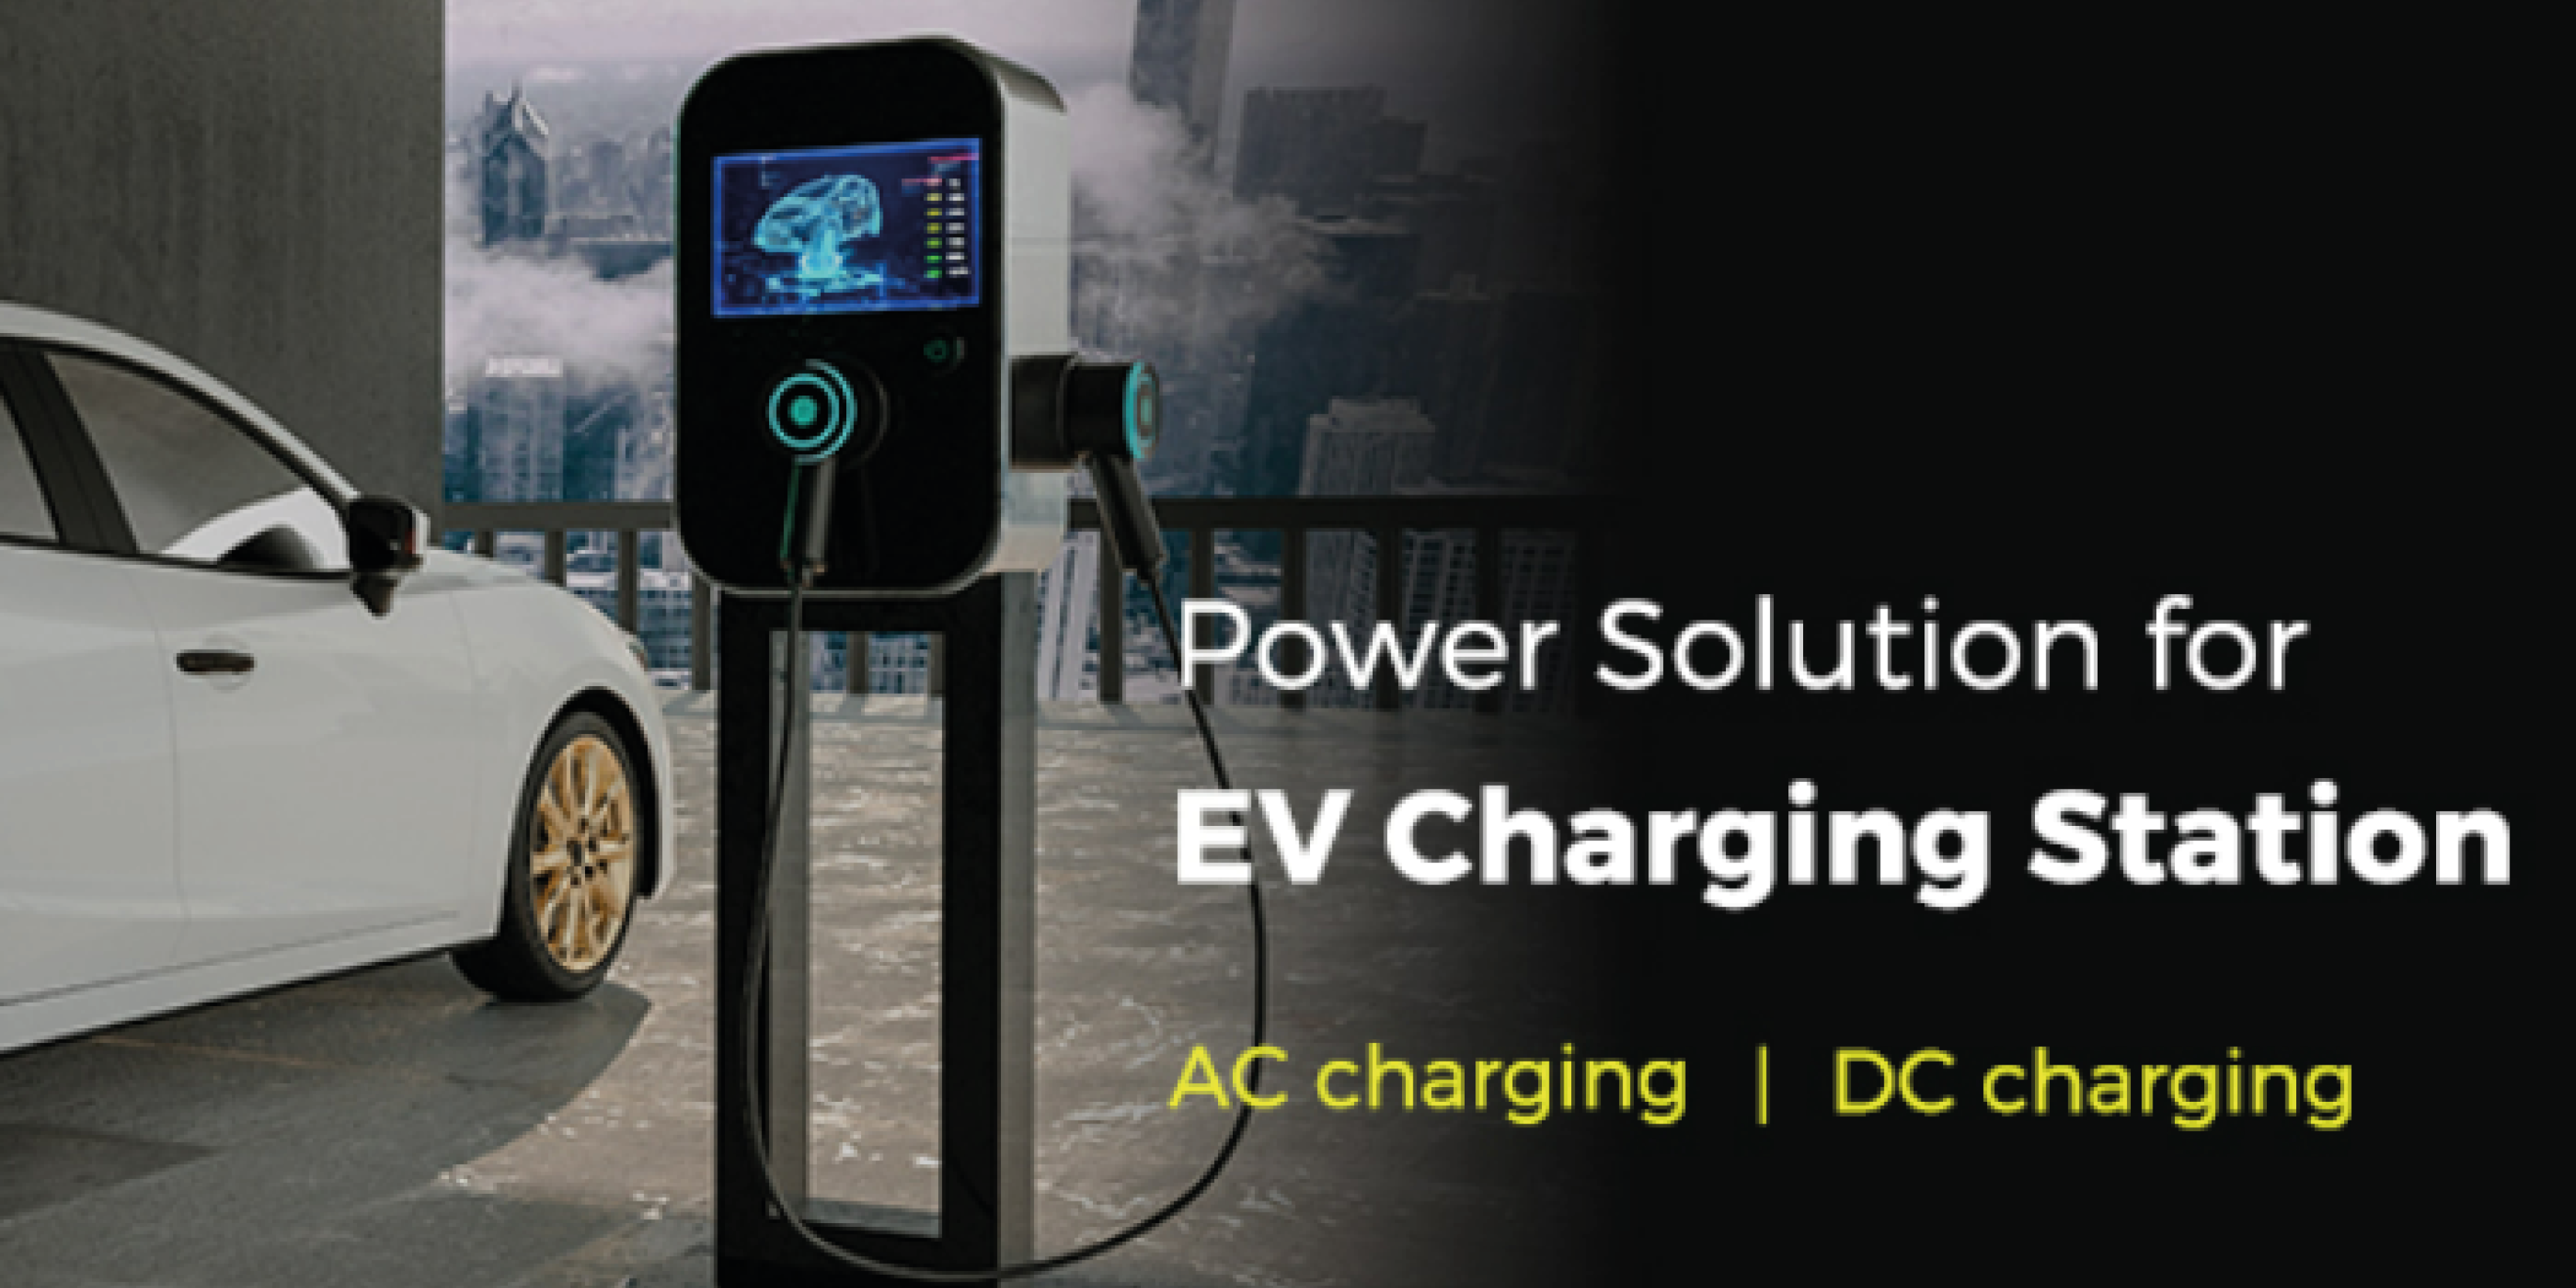 Power supply solutions for EV charging stations